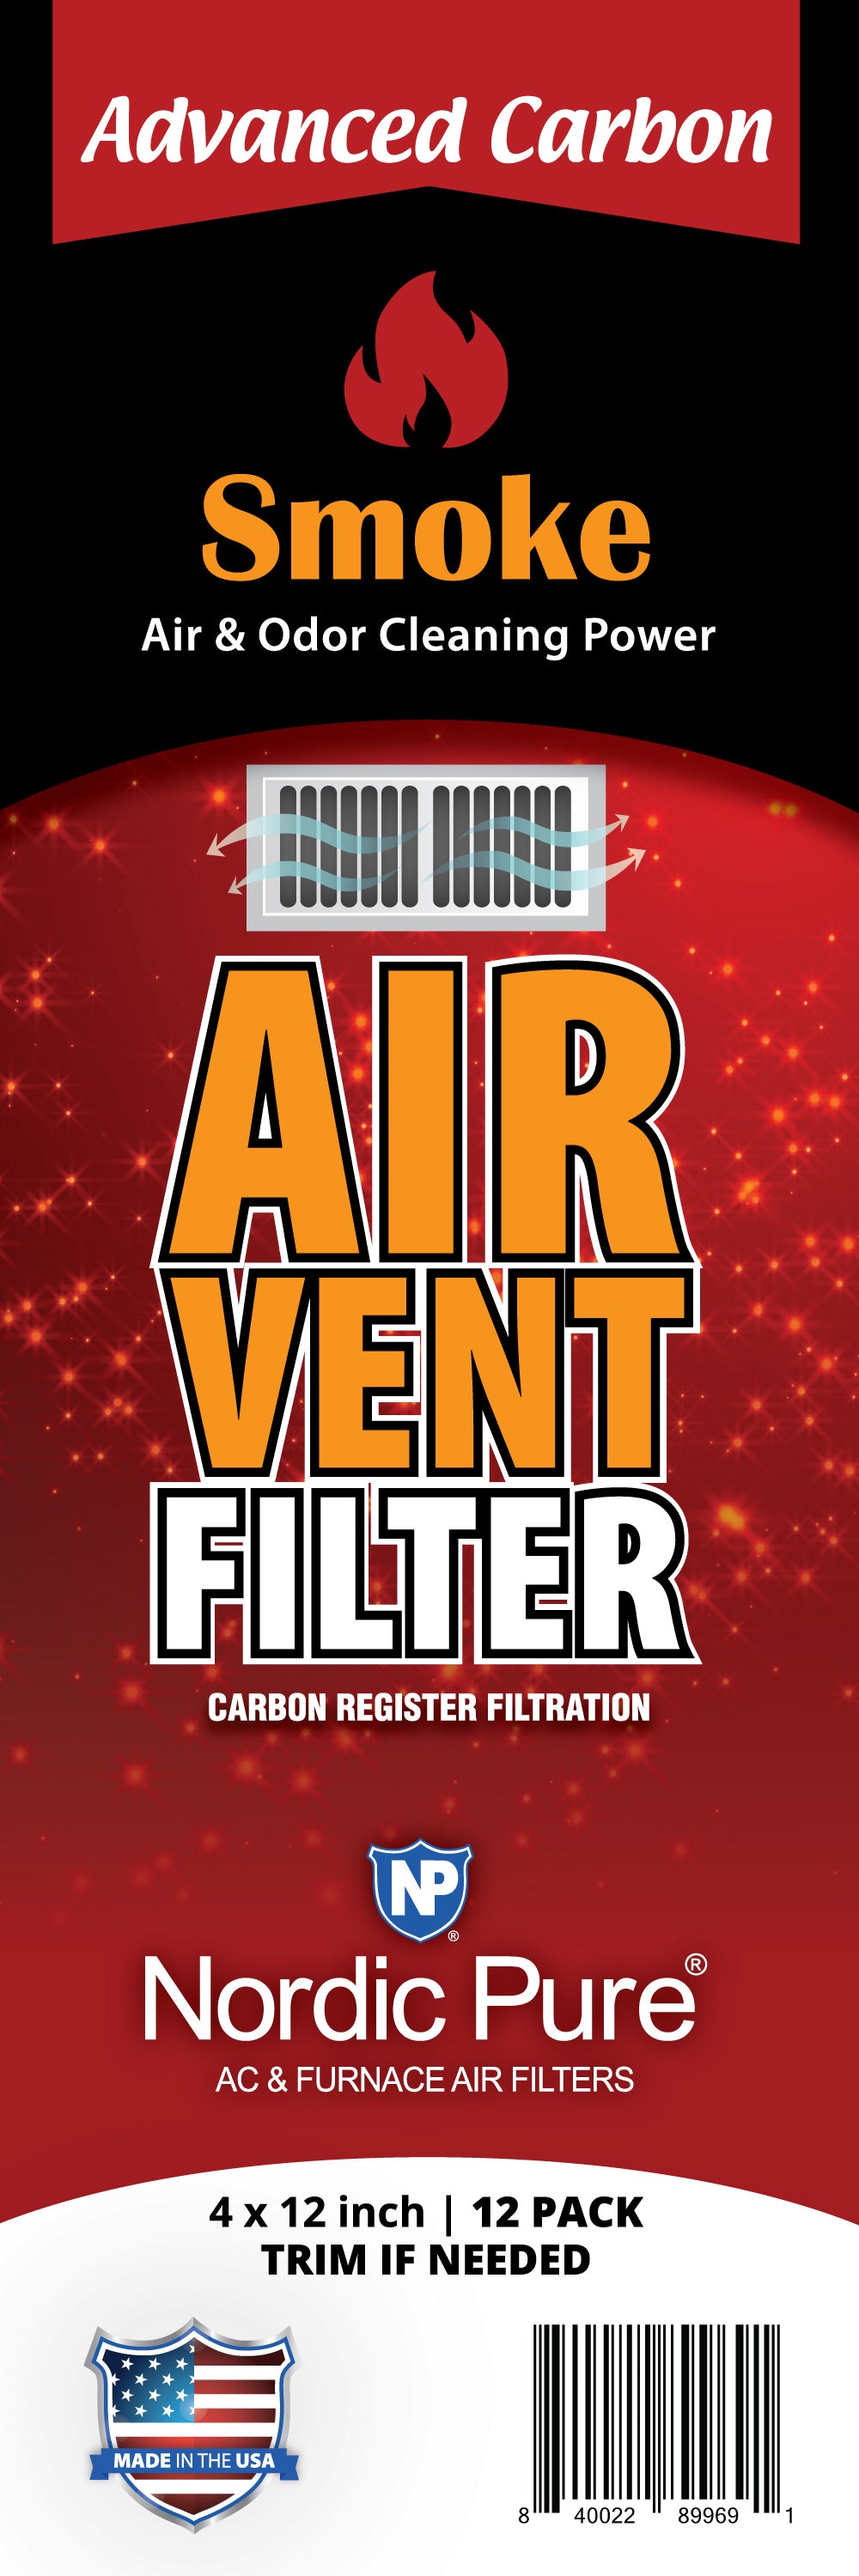 Smoke Odor Reducing Advanced Carbon Air Vent Filters 4x12 (Register Vent Filters)